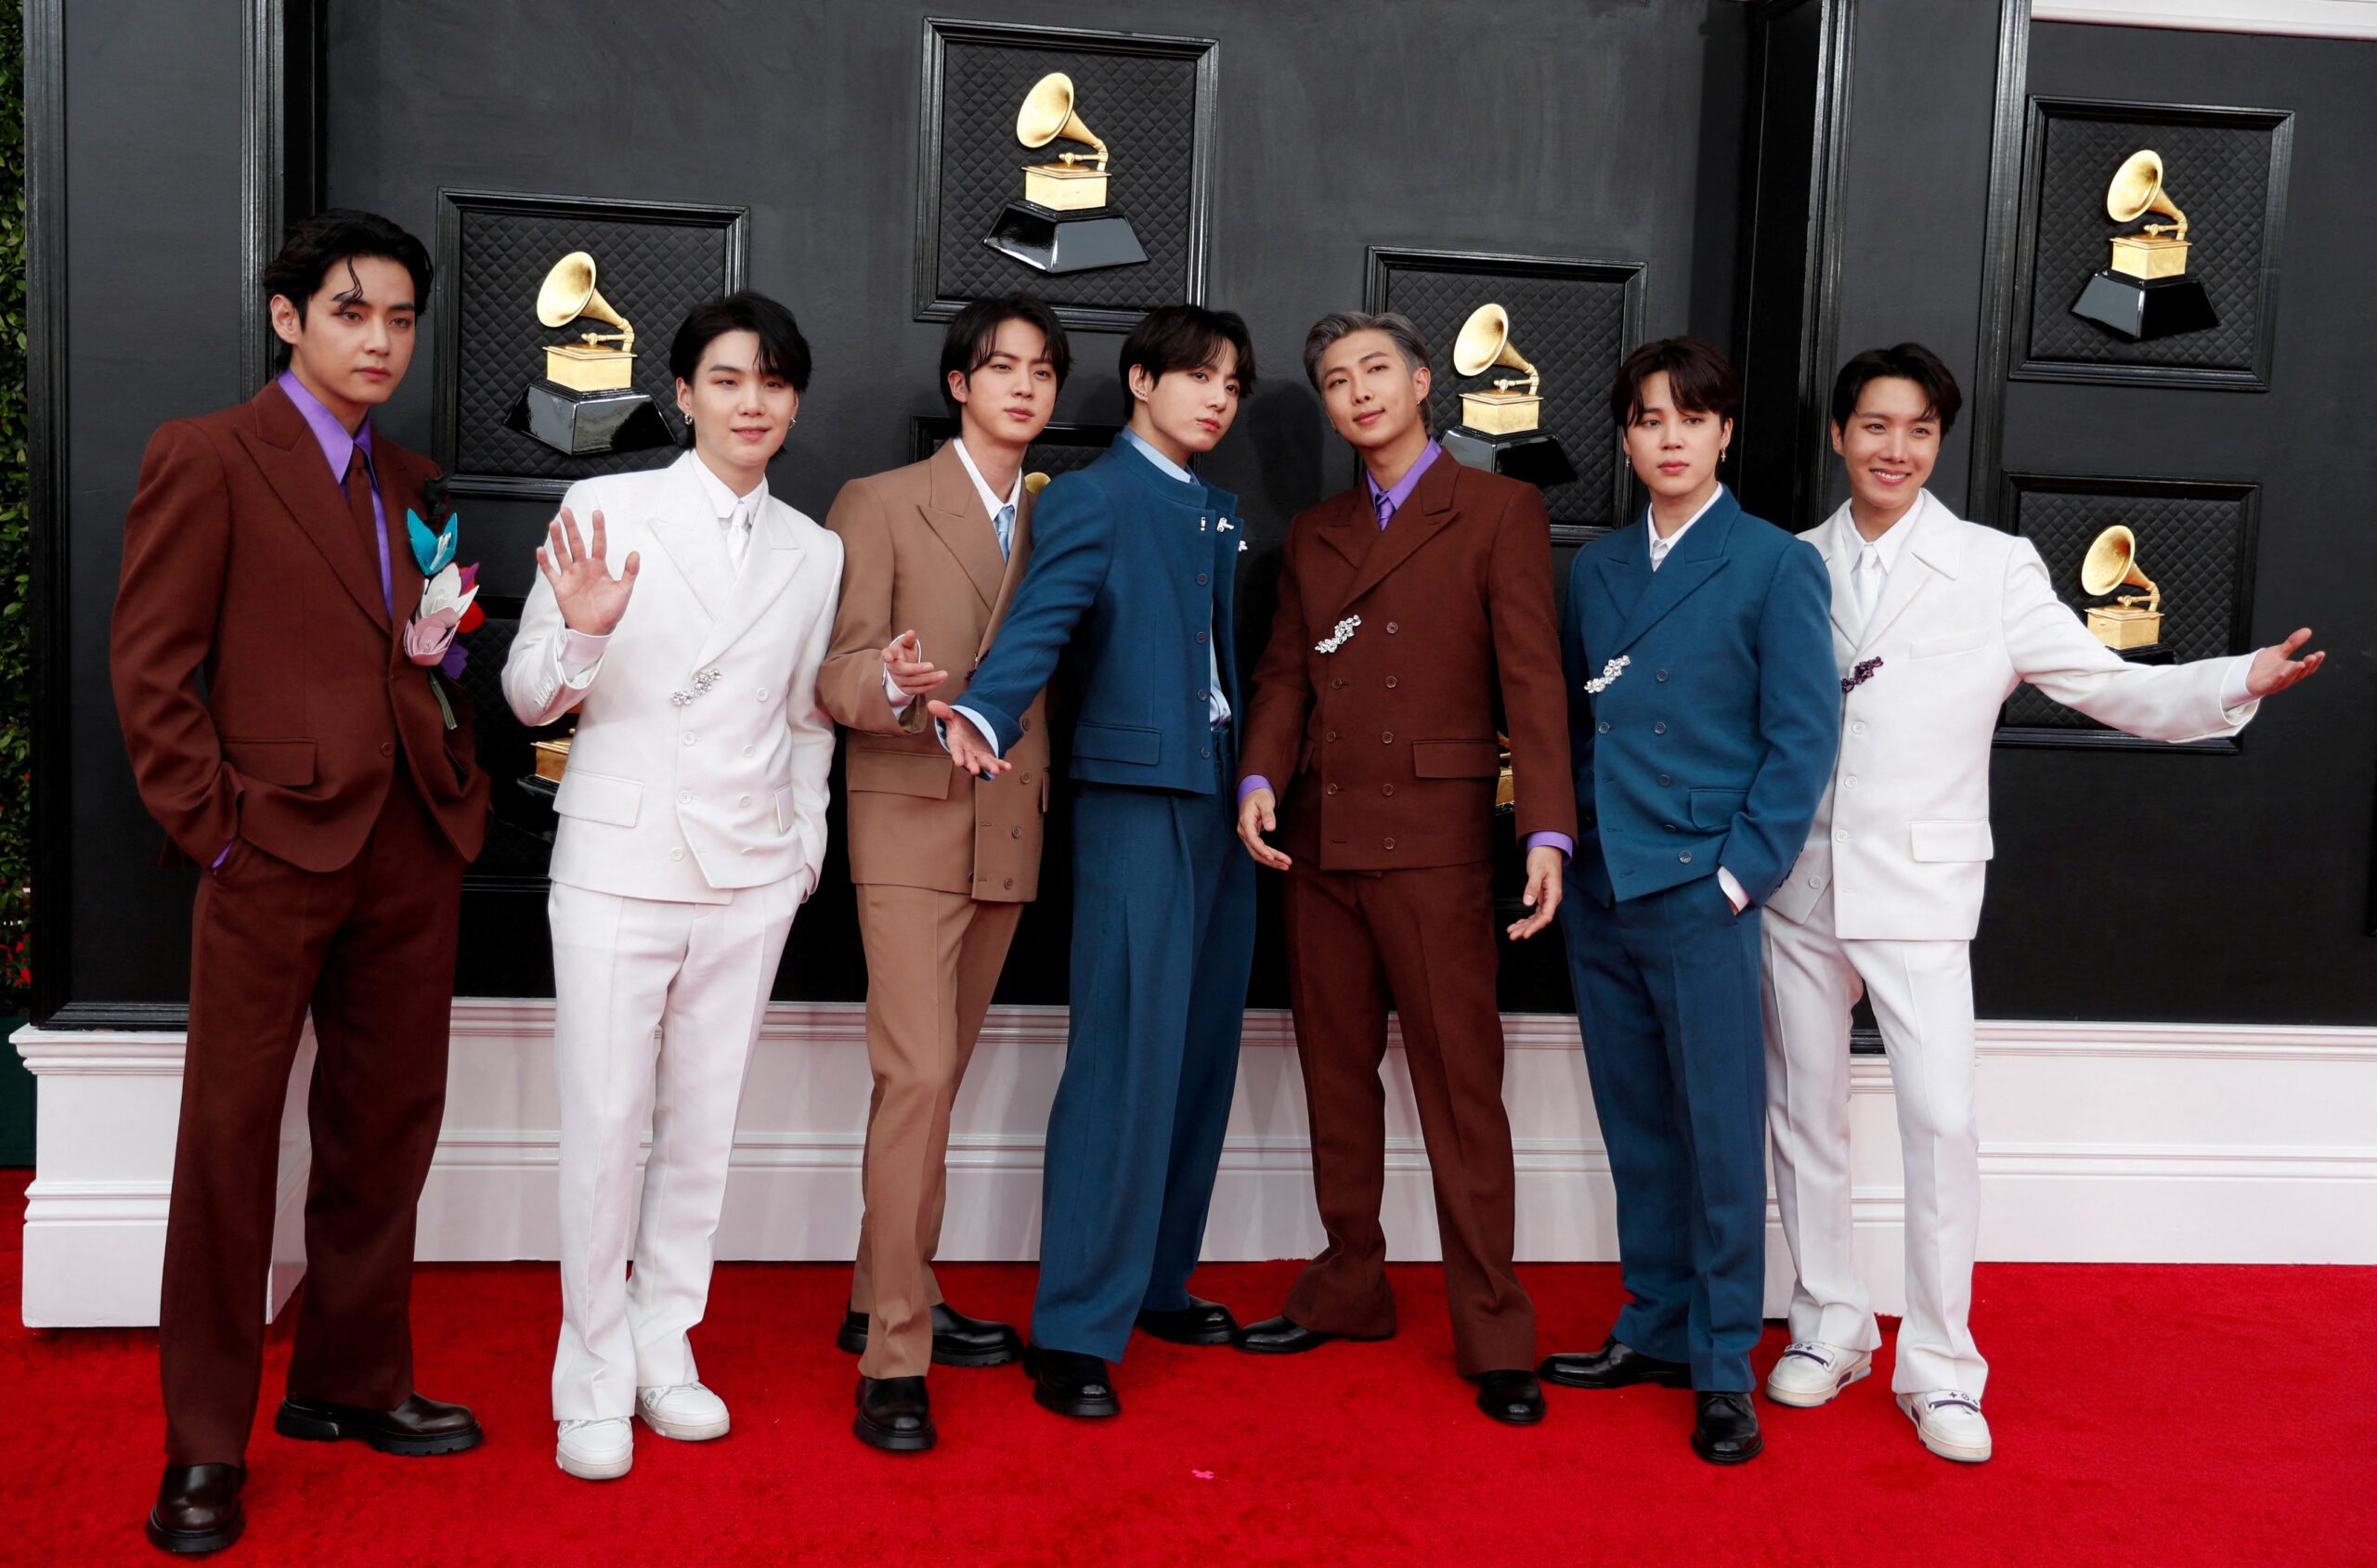 Shares in BTS’ management rise after band clears uncertainty over military service